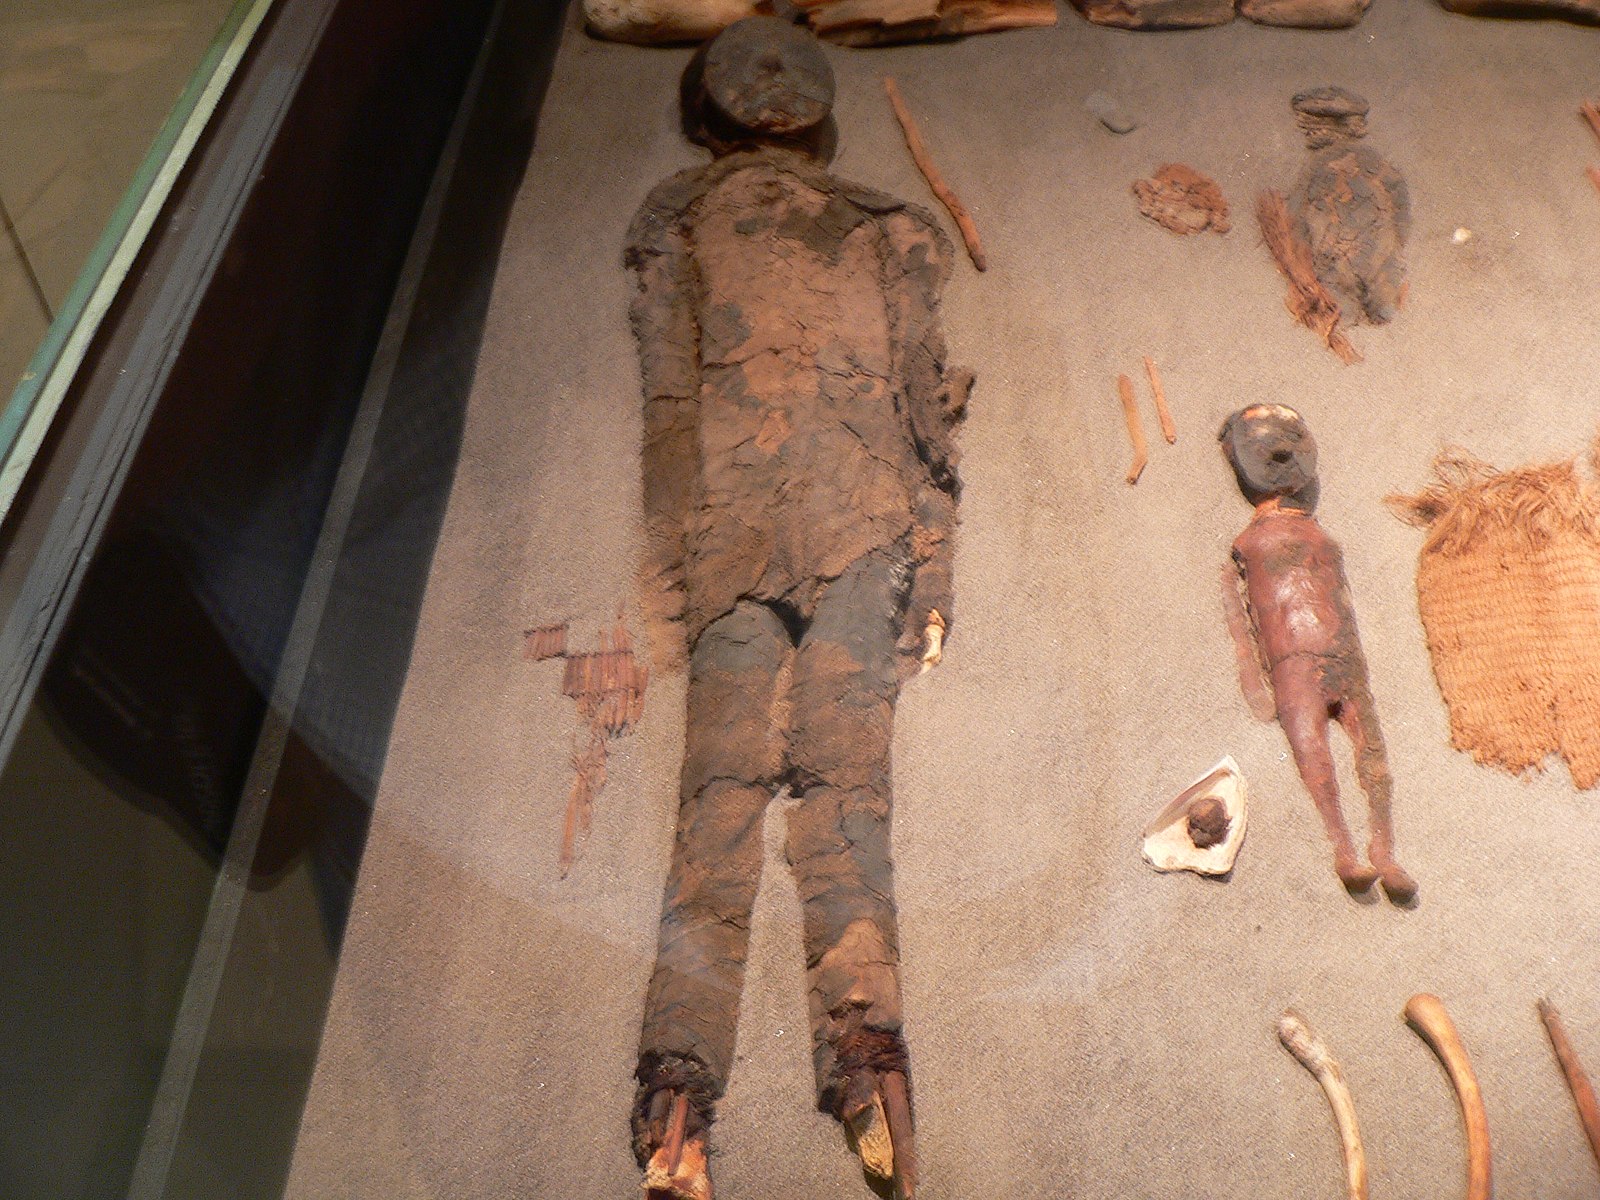 The mummified remains of an adult person and a child lay in a glass container for observation. The adult has a clay mask and black hair attached to their skull. The child lays next to the adult, with red paint on their body and a clay mask. 